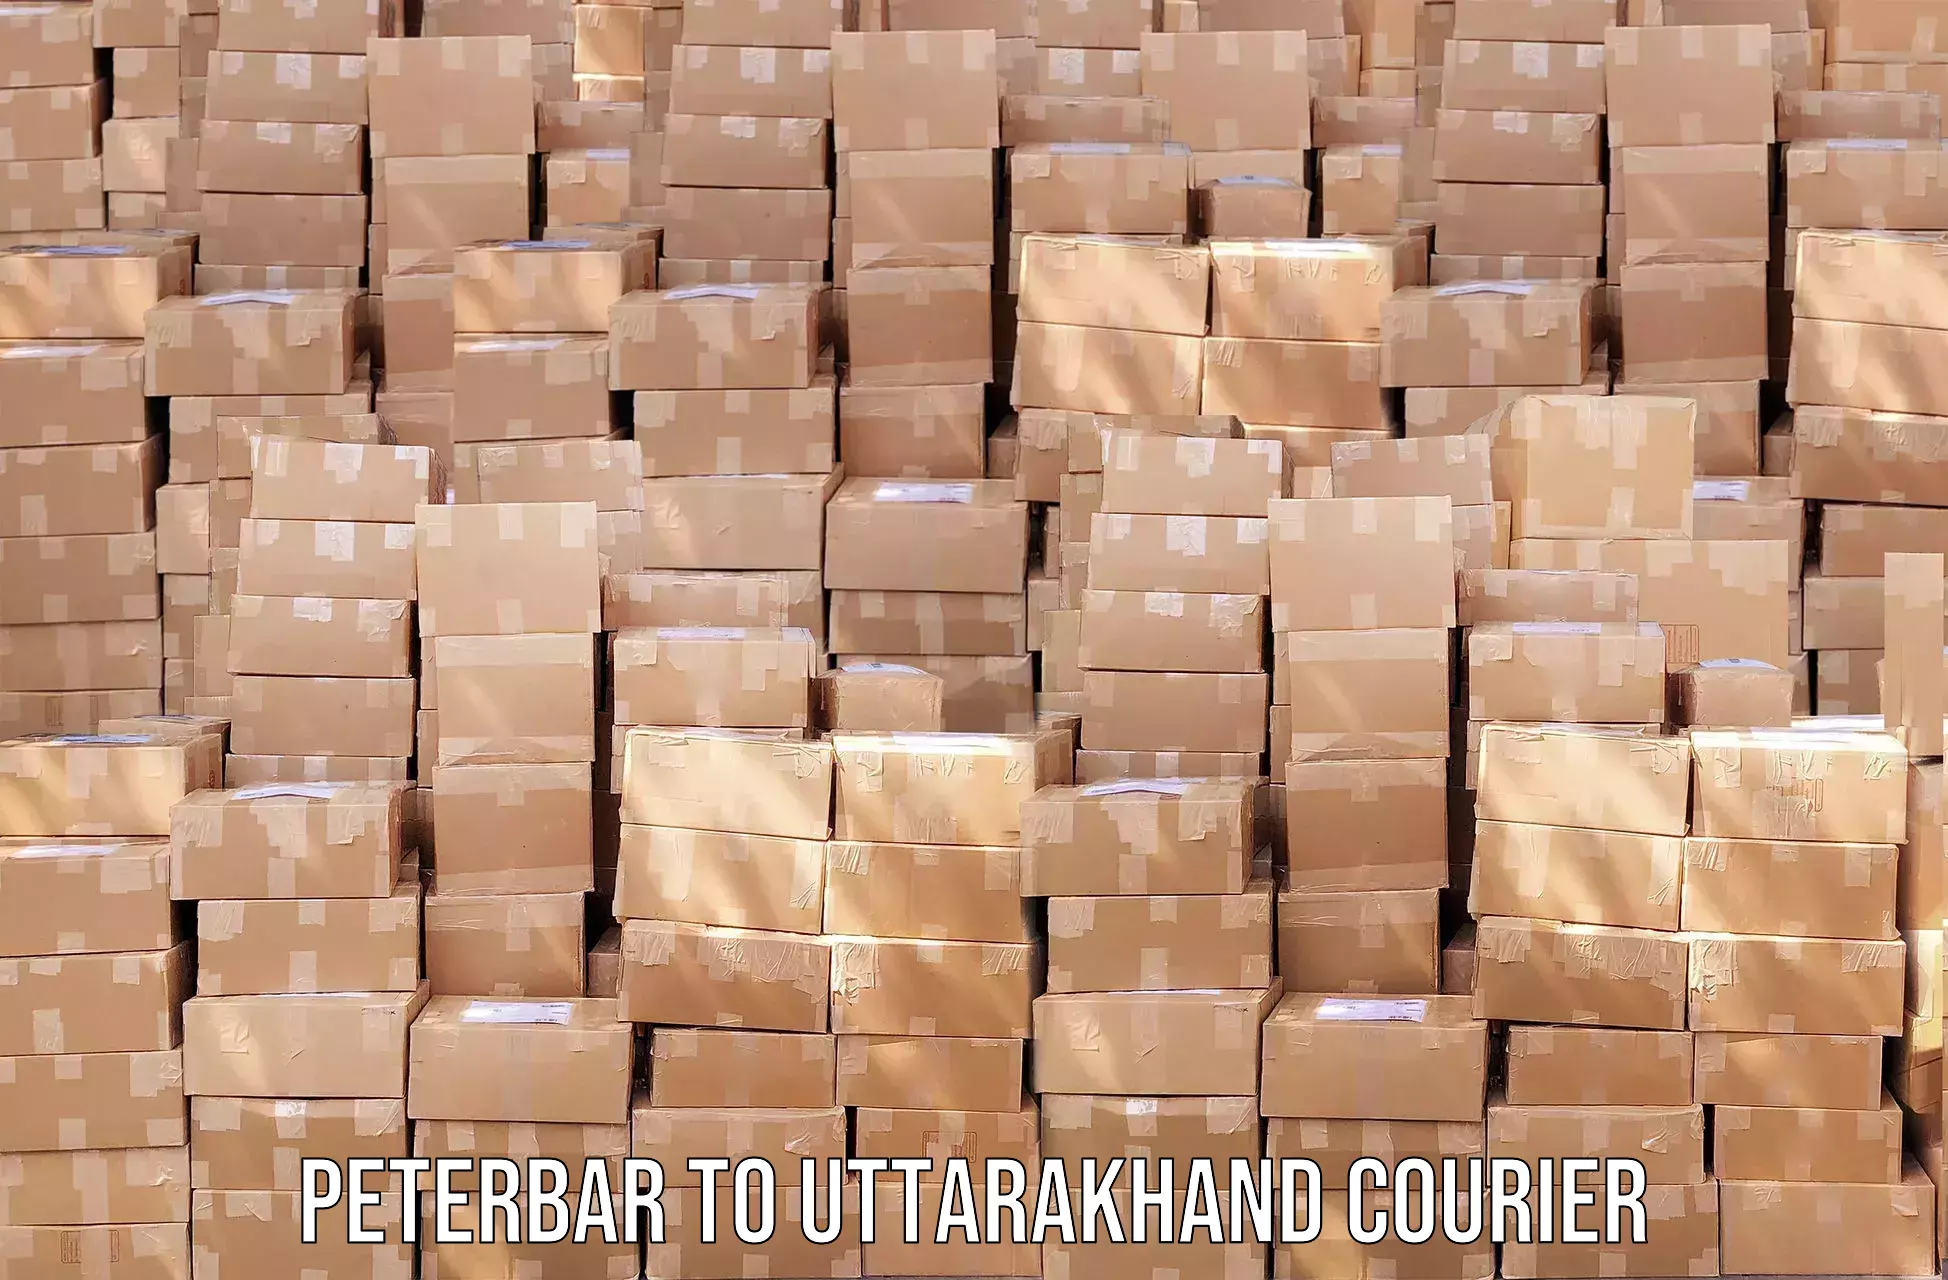 Global courier networks Peterbar to Almora